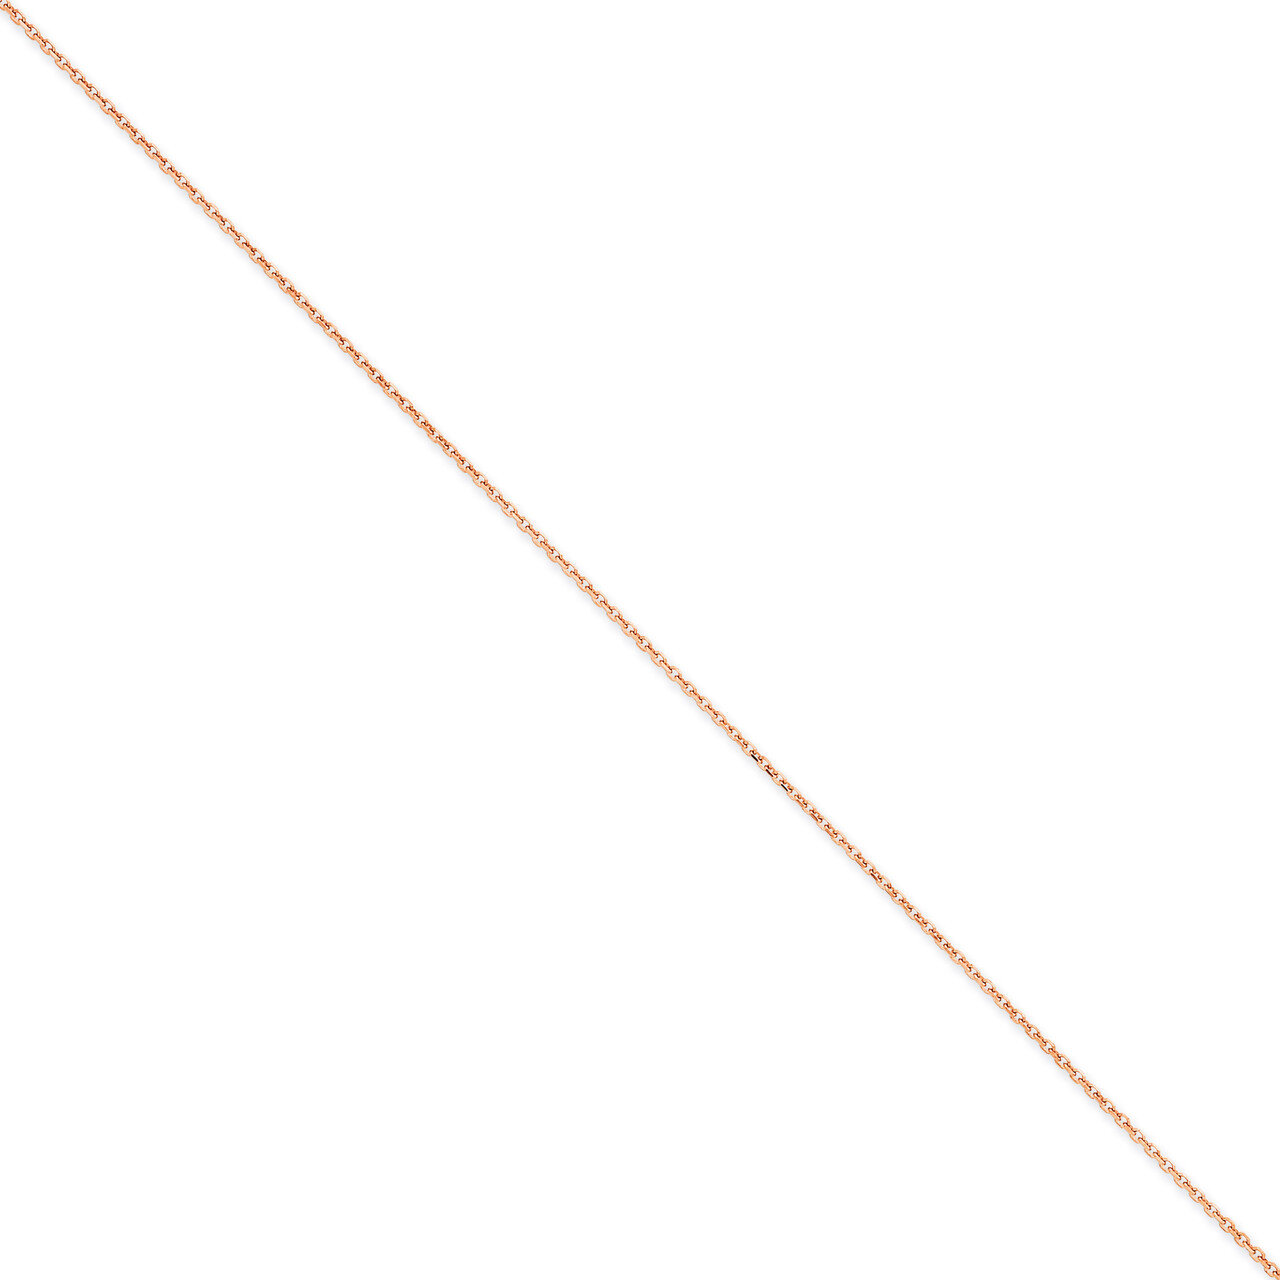 1.4mm Diamond-cut Cable Chain 16 Inch 14k Rose Gold RSC21-16